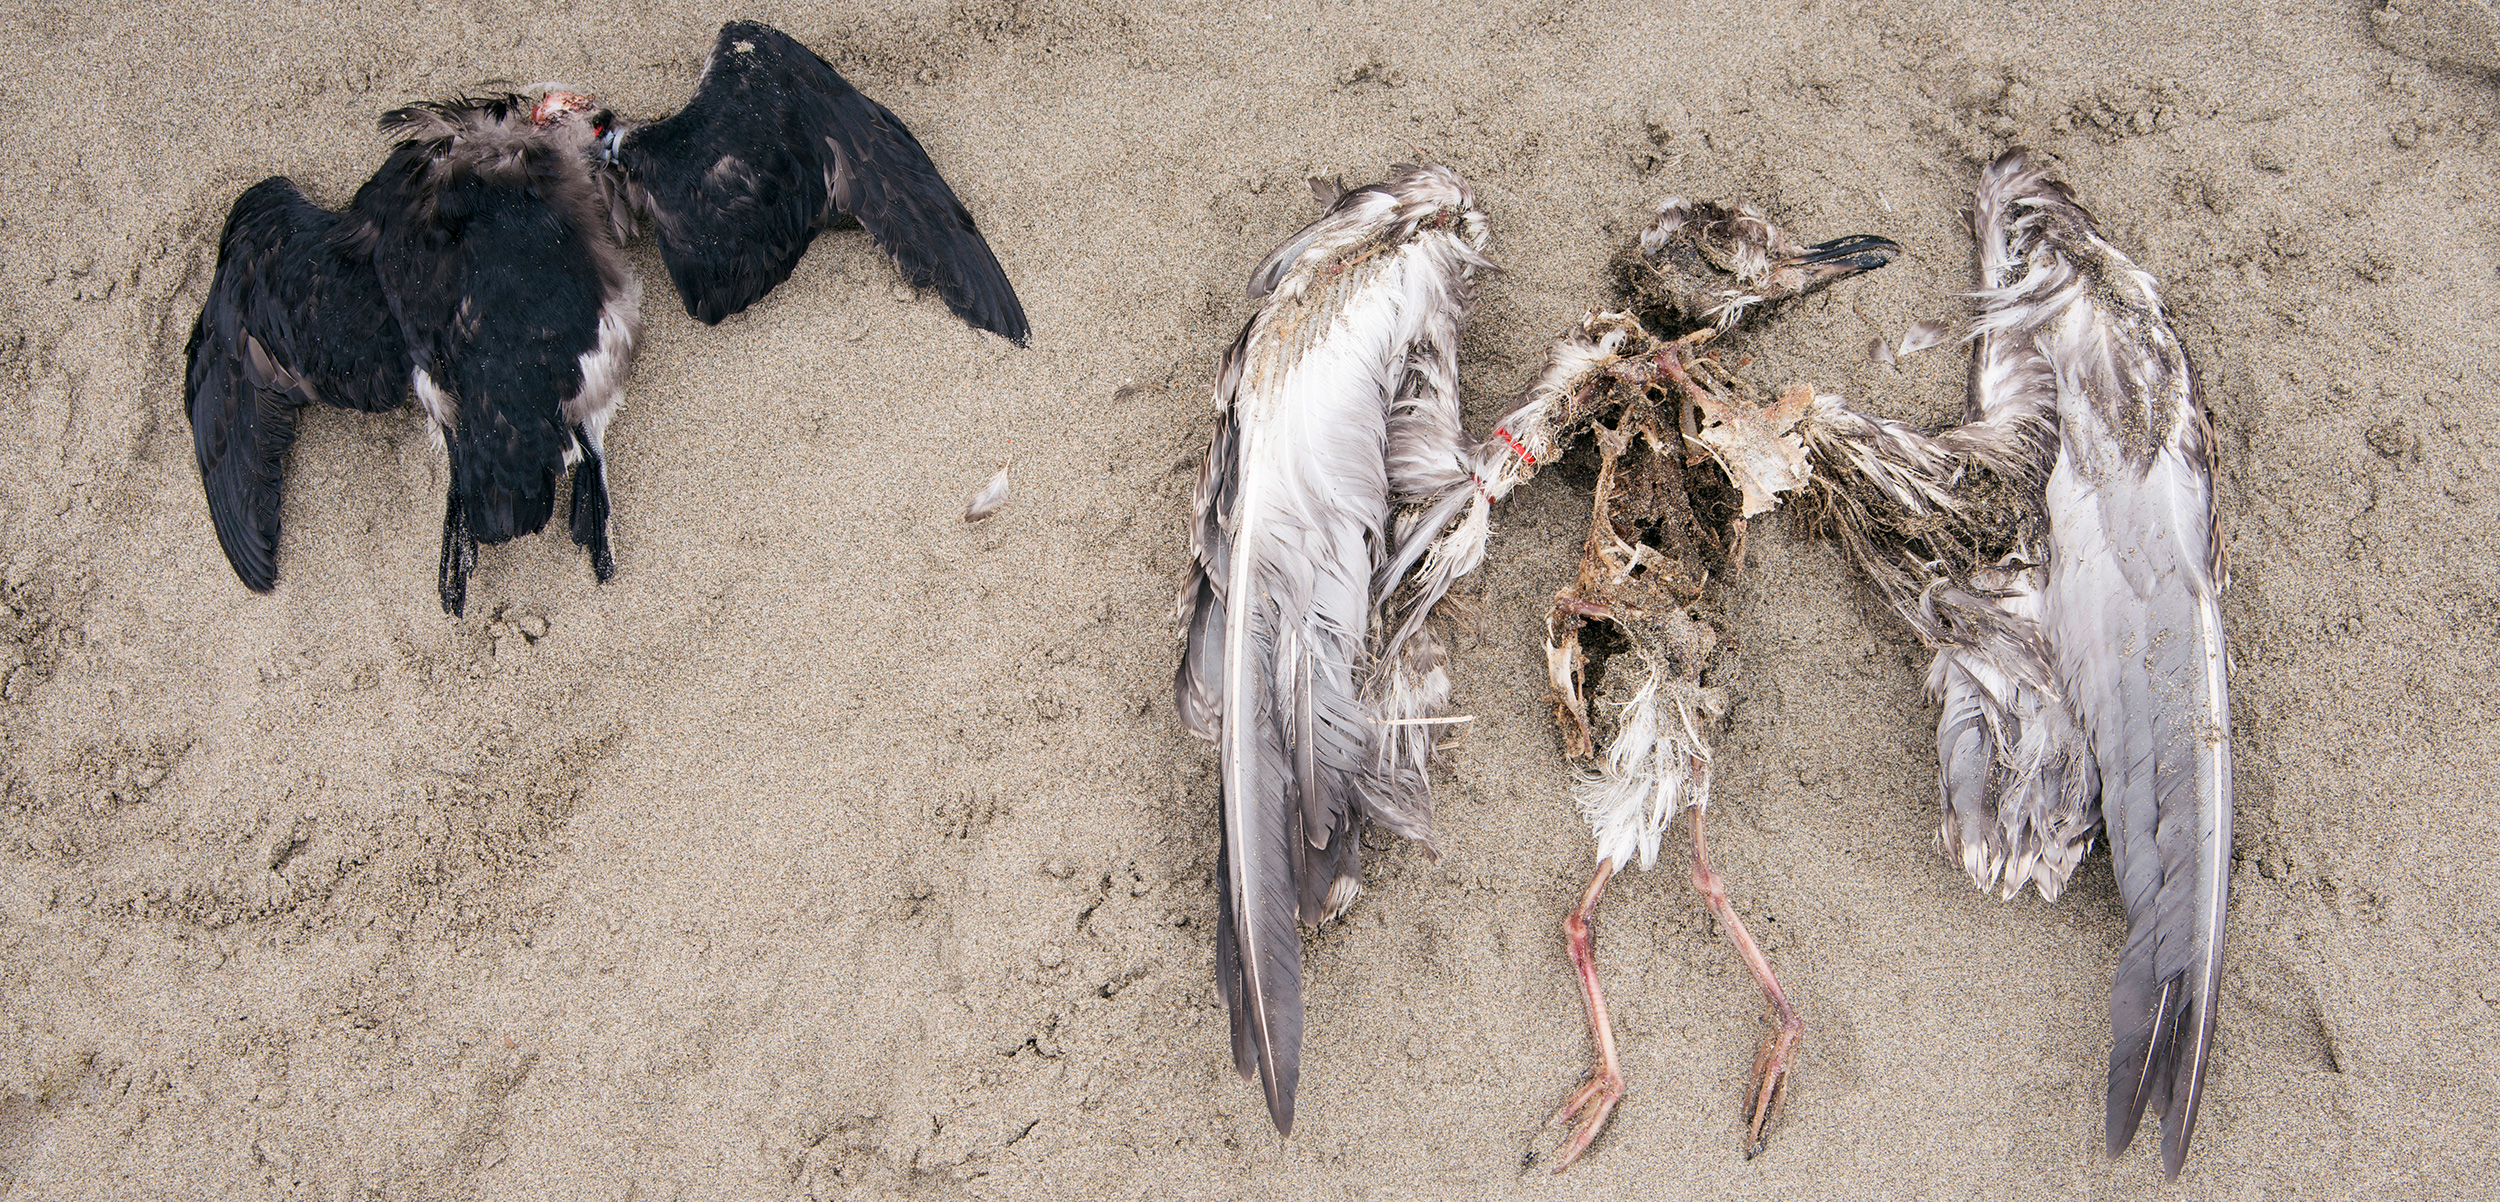 Volunteers on the Coastal Observation and Seabird Survey Team (COASST) regularly walk beaches from Alaska to Northern California in search of seabird casualties, such as this headless rhinoceros auklet (left) and immature gull of an undetermined species. Photo by Shanna Baker